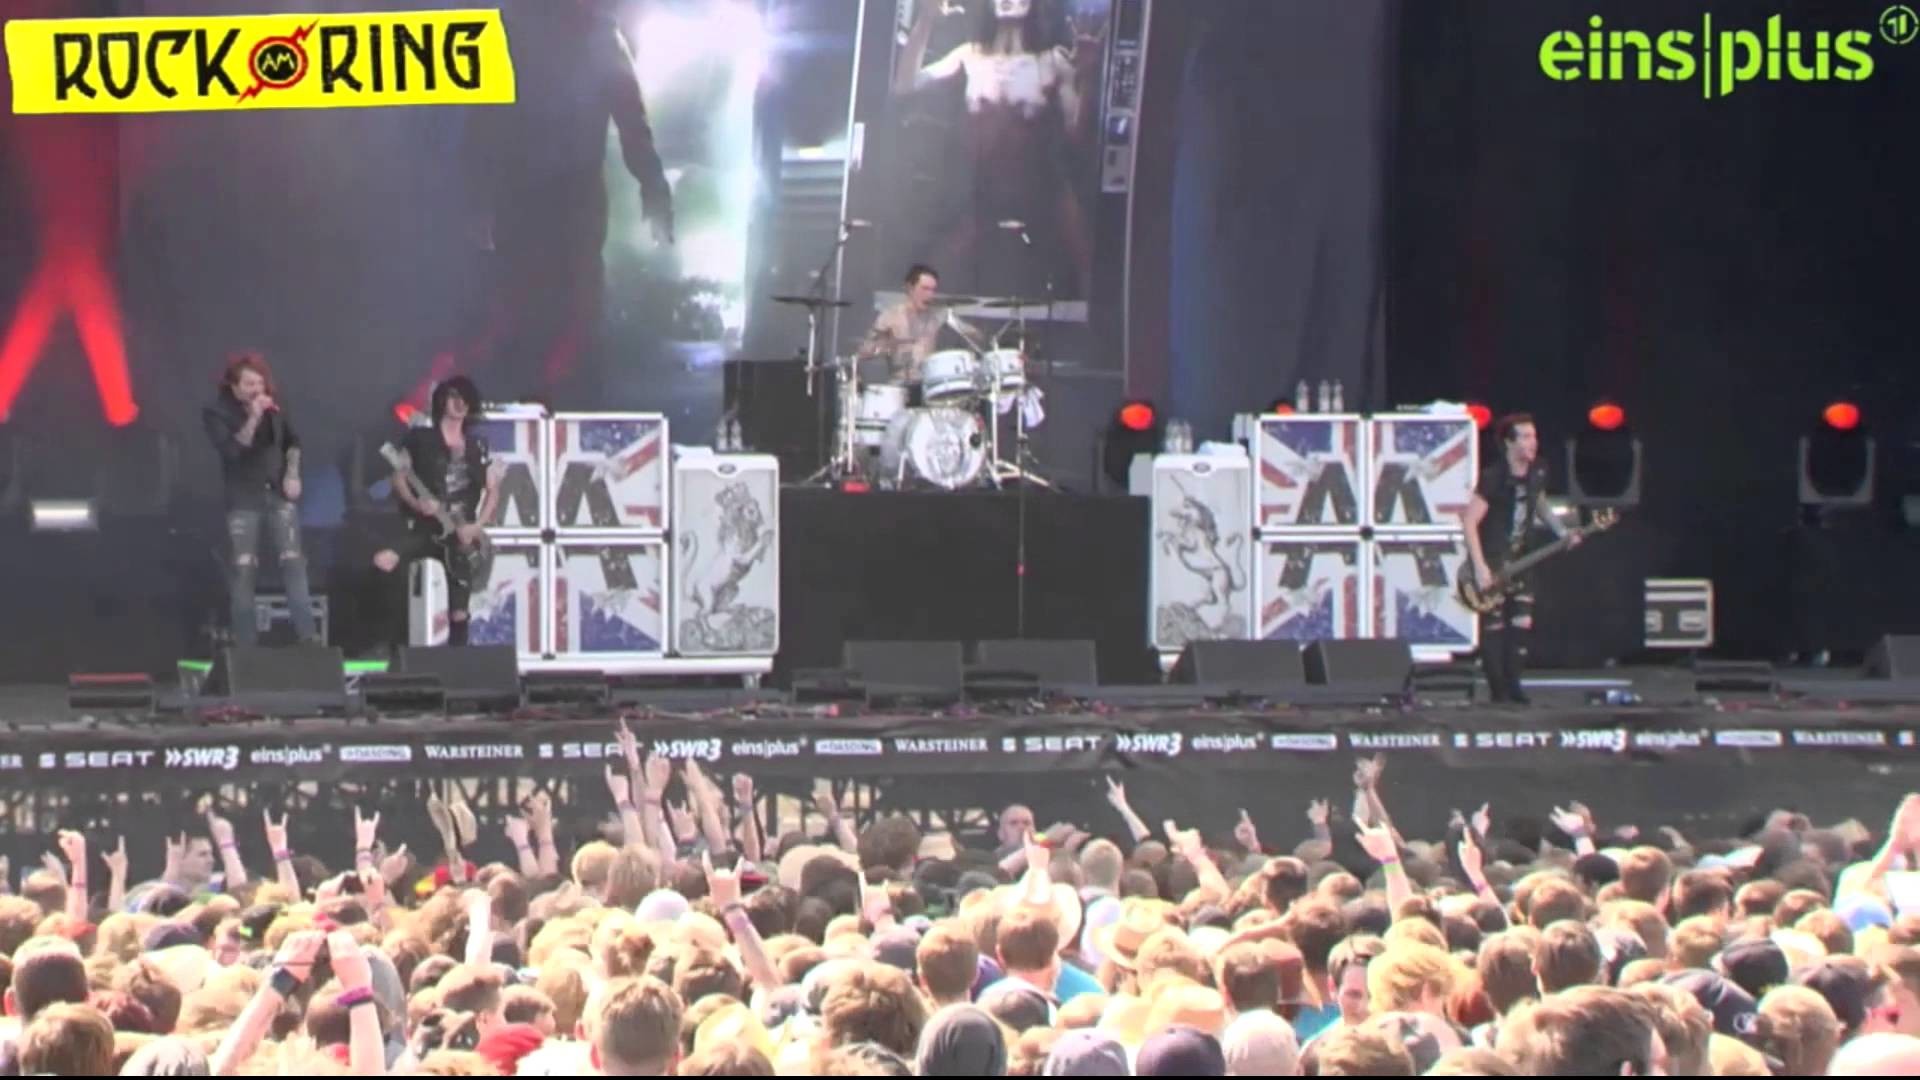 1920x1080 Asking Alexandria -- Breathless (Live @ Rock am Ring 2013 07.06) - YouTube